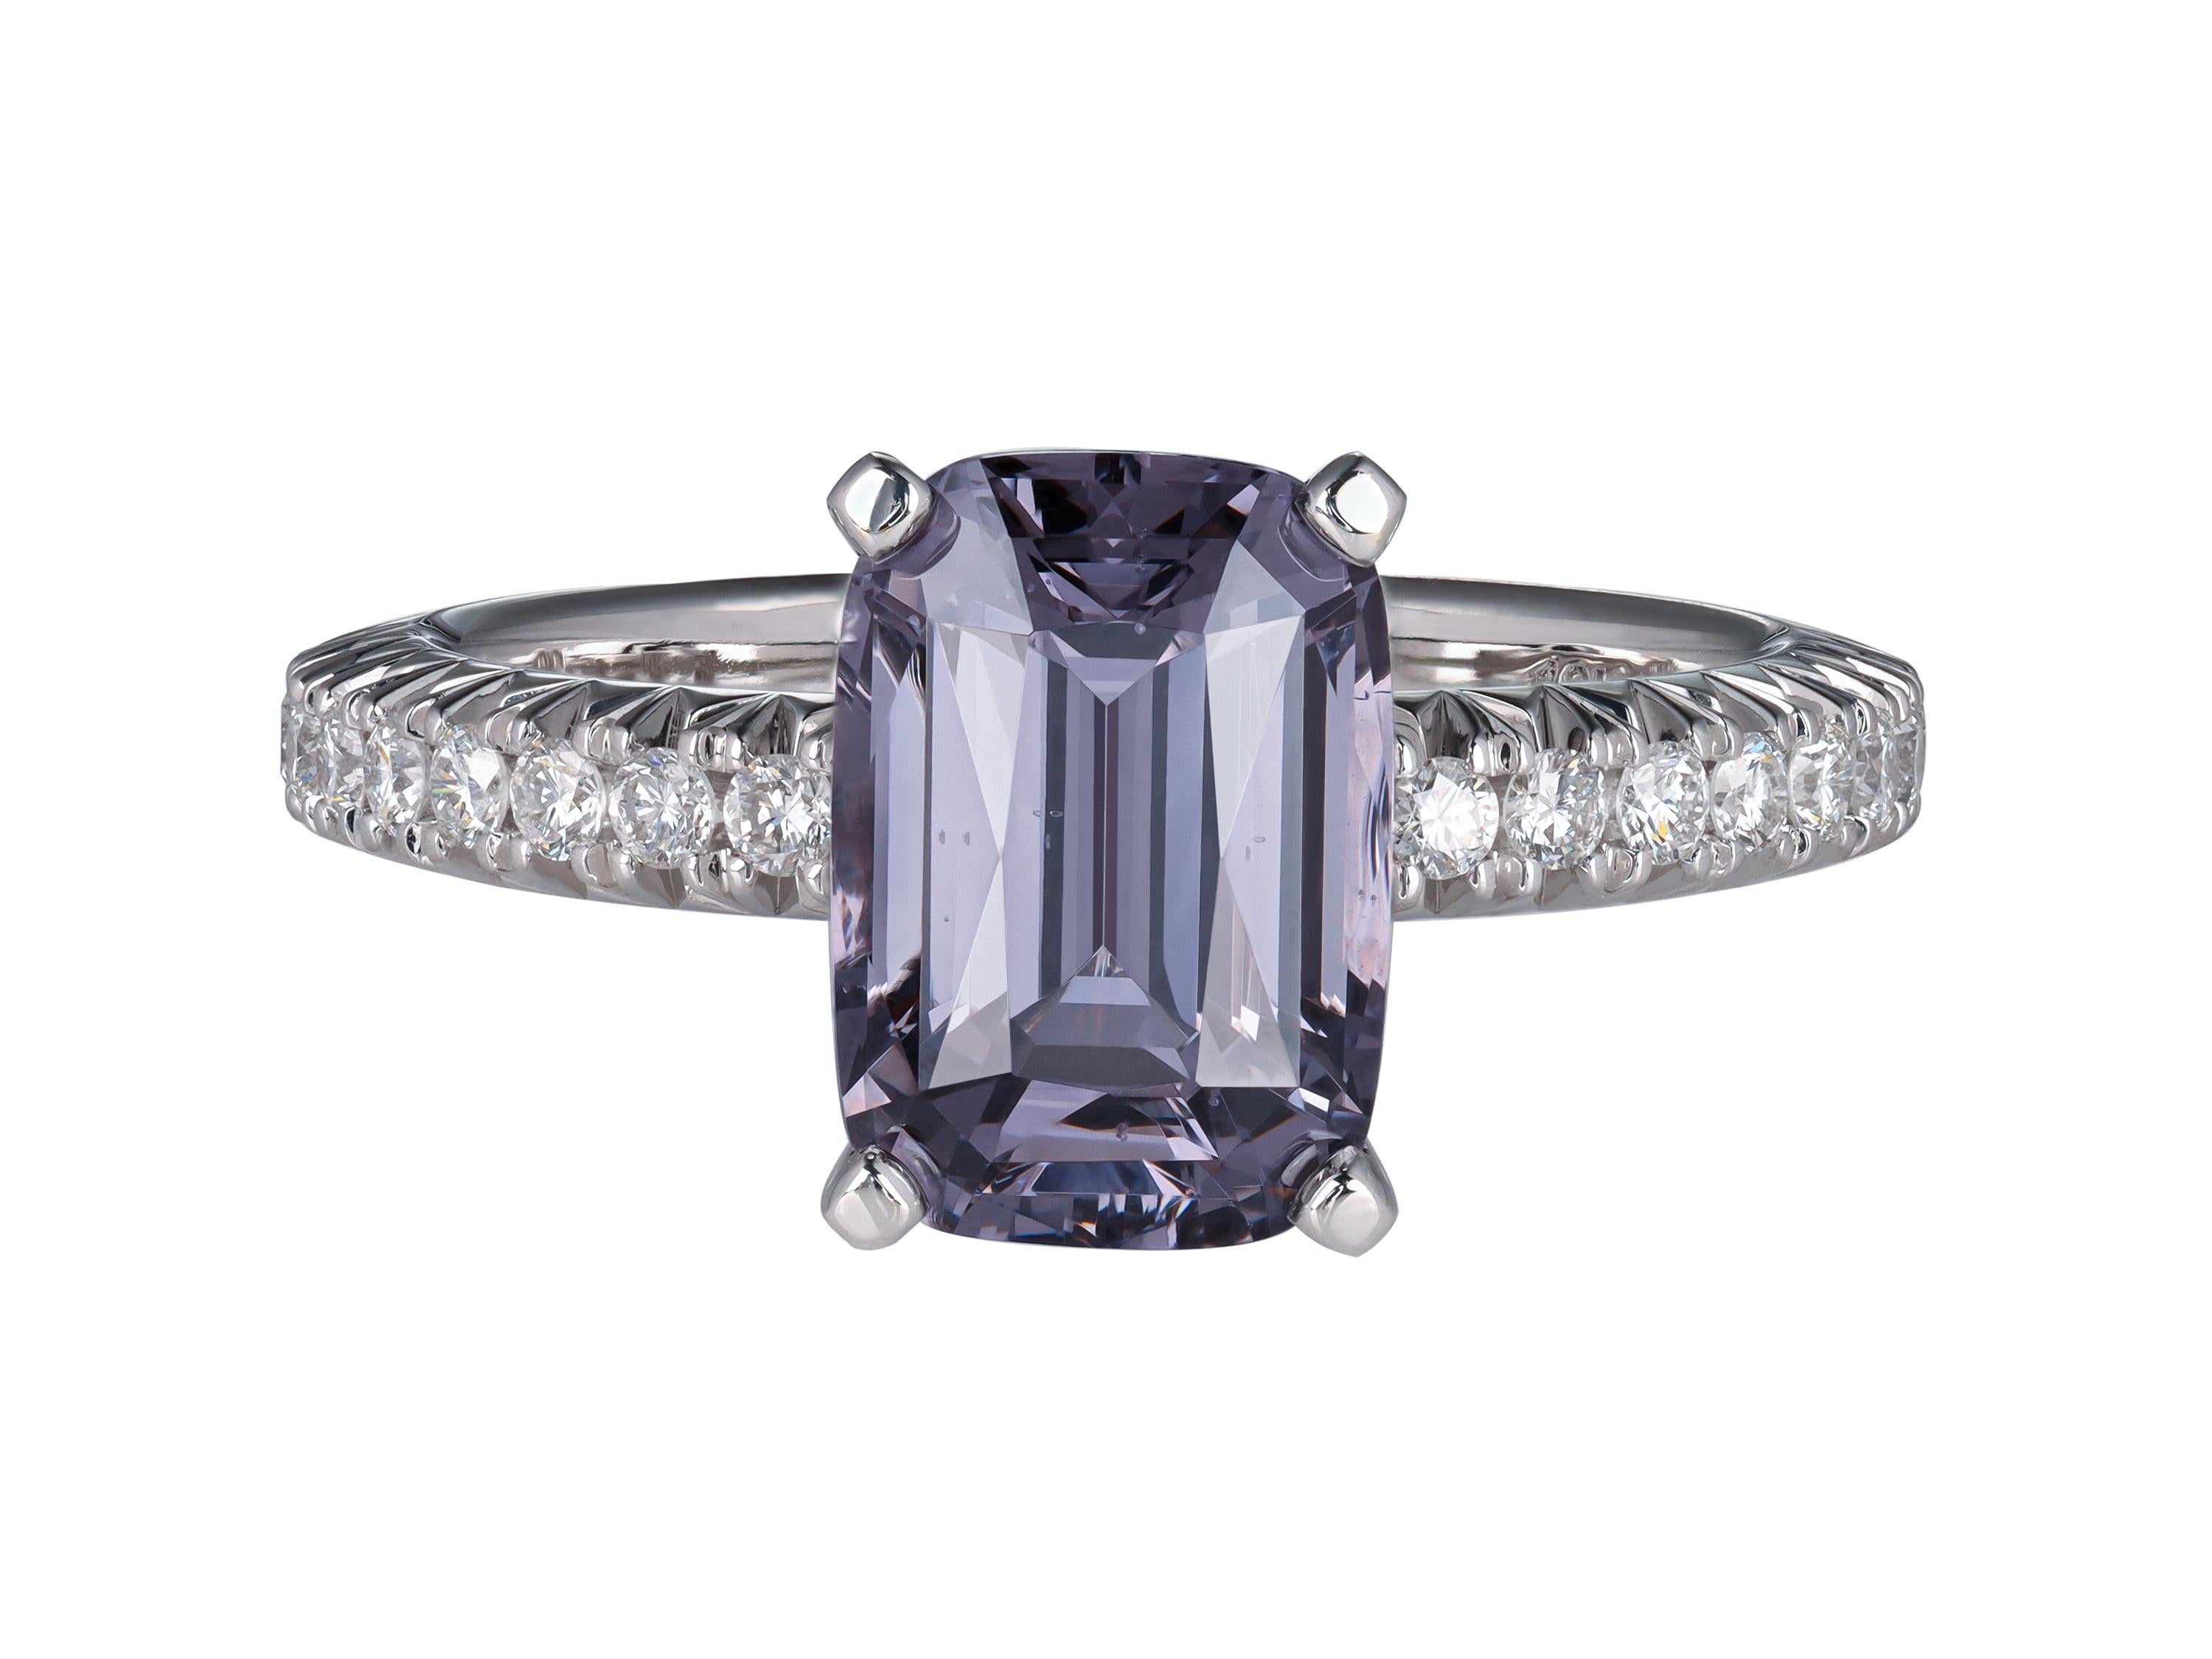 The 3.41 carat Lavender Spinel has a stylish cushion-cut shape, and its rich hue combined with vibrant play and dispersion gives the stone a special, unique look. 

The classically styled ring is set with 36 brilliant-cut diamonds (F/VS) totaling